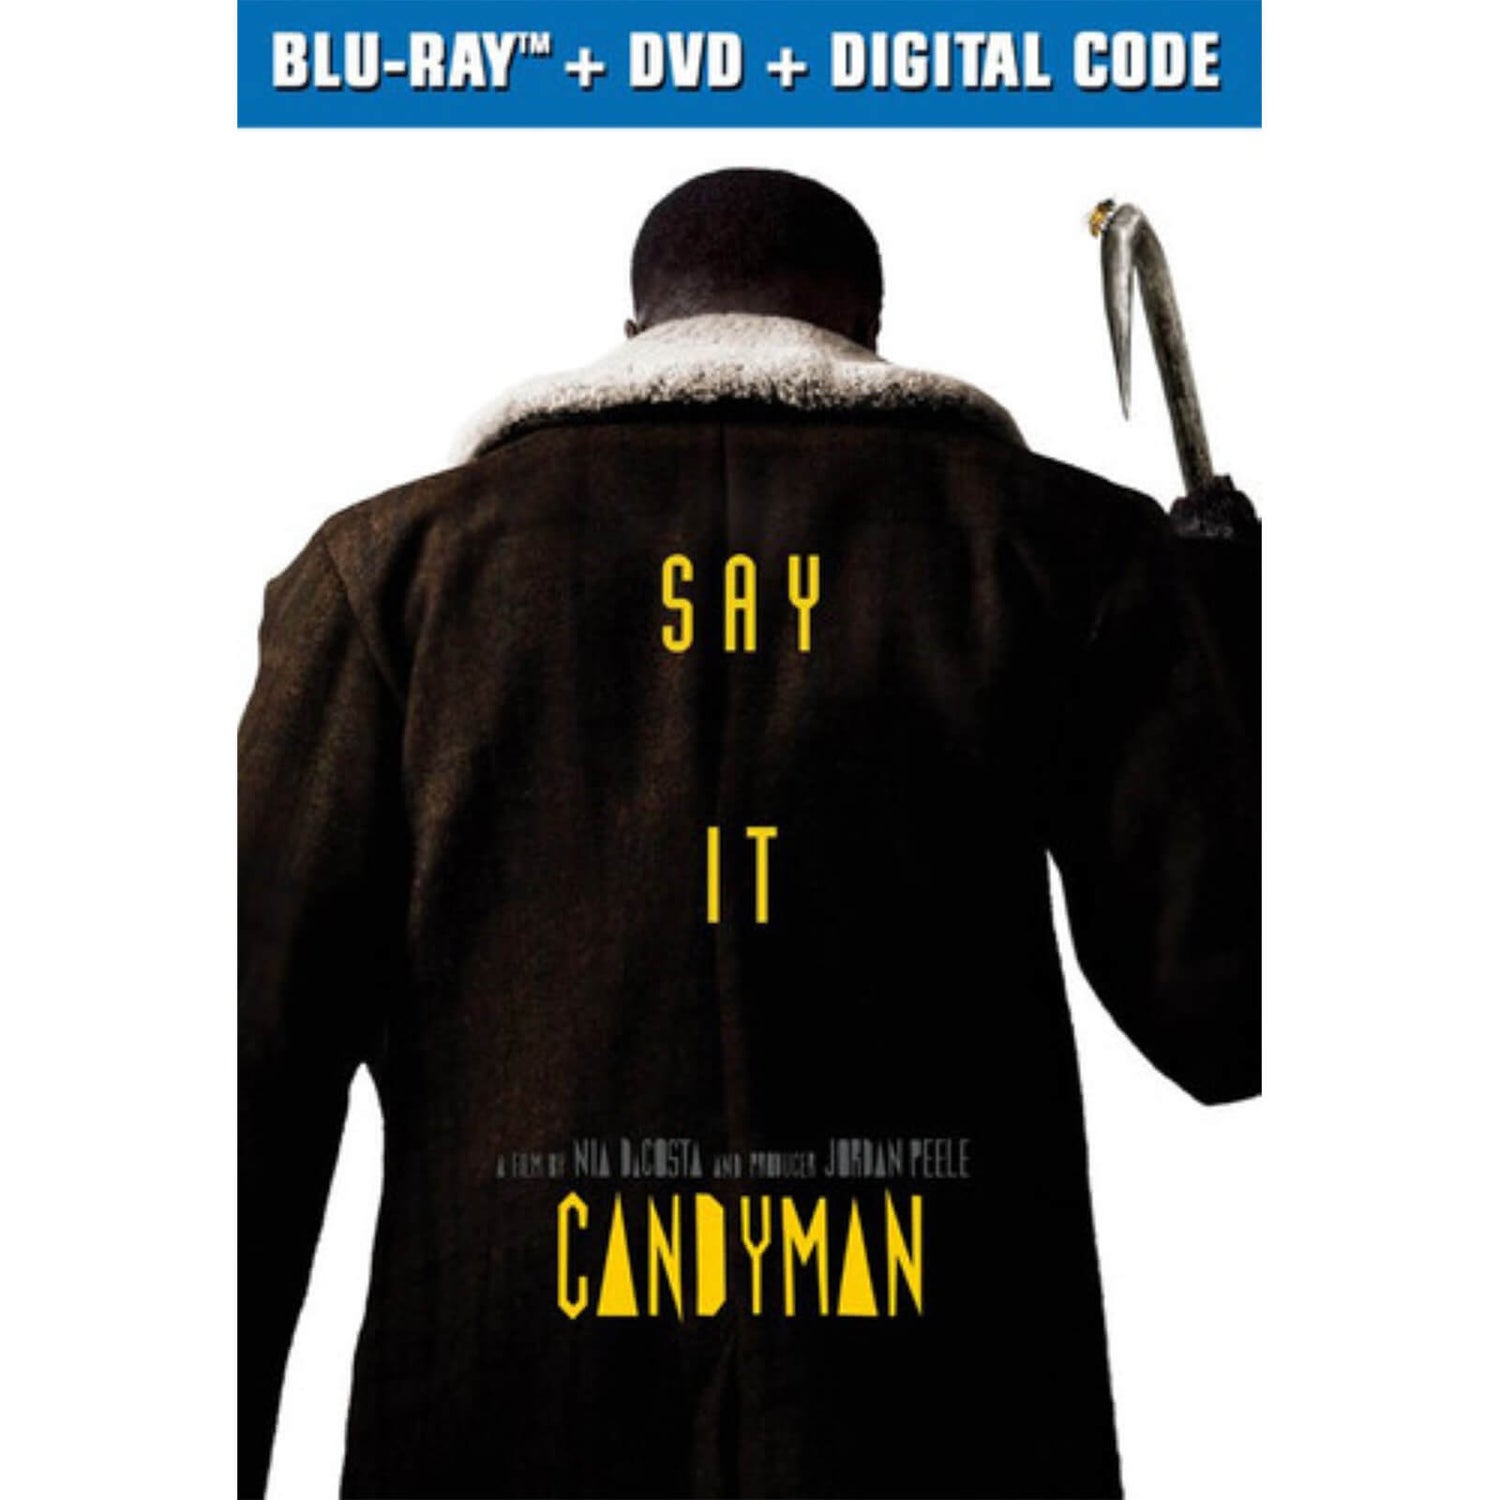 Candyman (Includes DVD) (US Import)